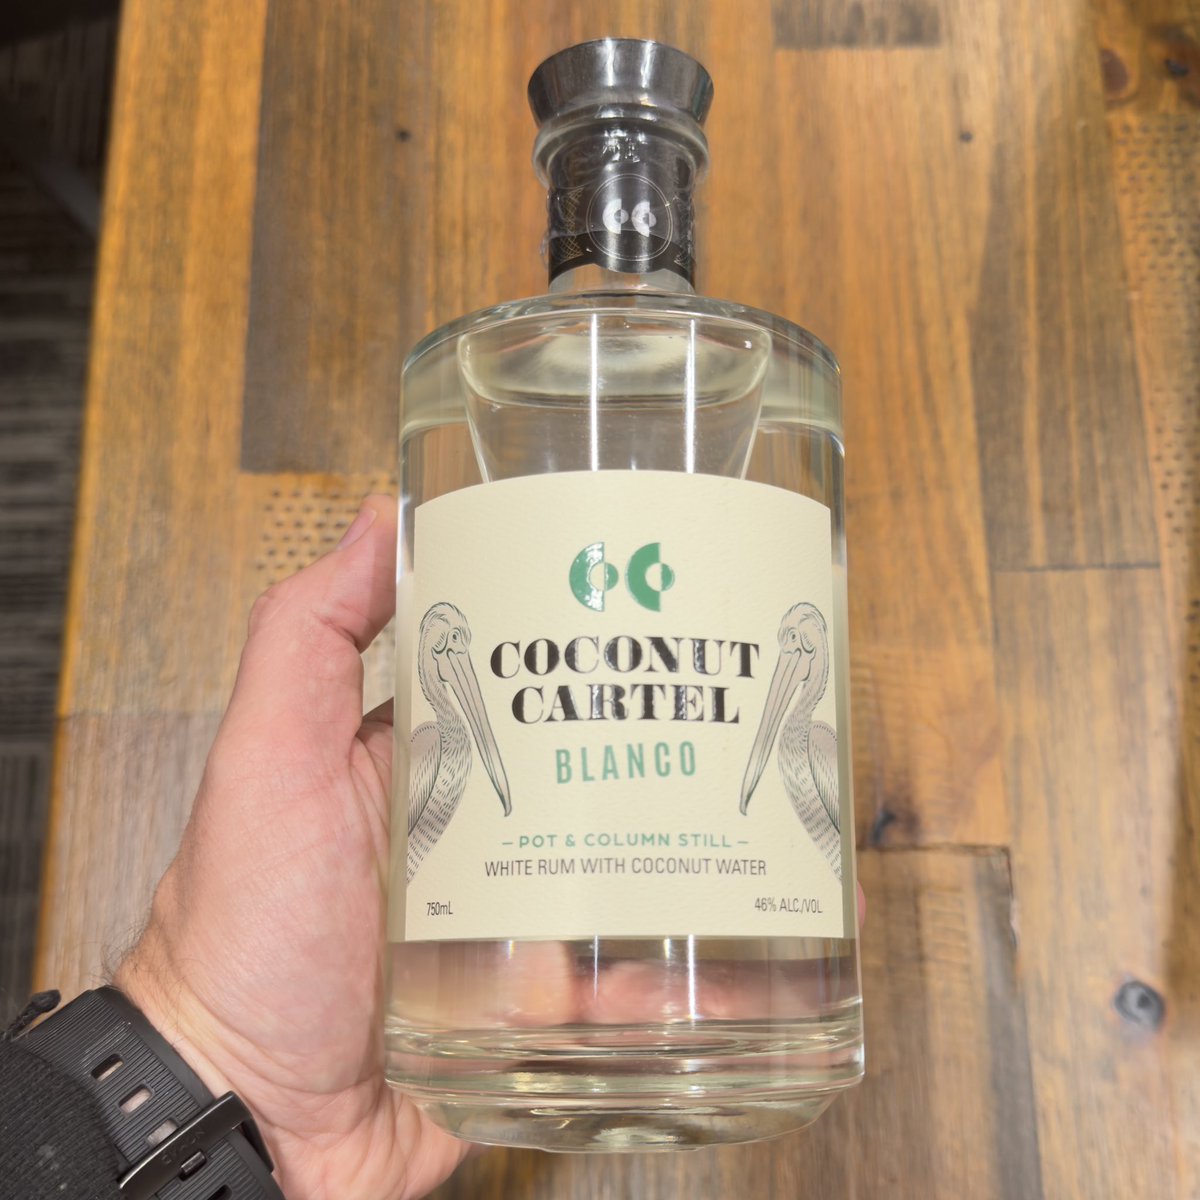 New Blanco Rum variety from @CoconutCartel is launching today